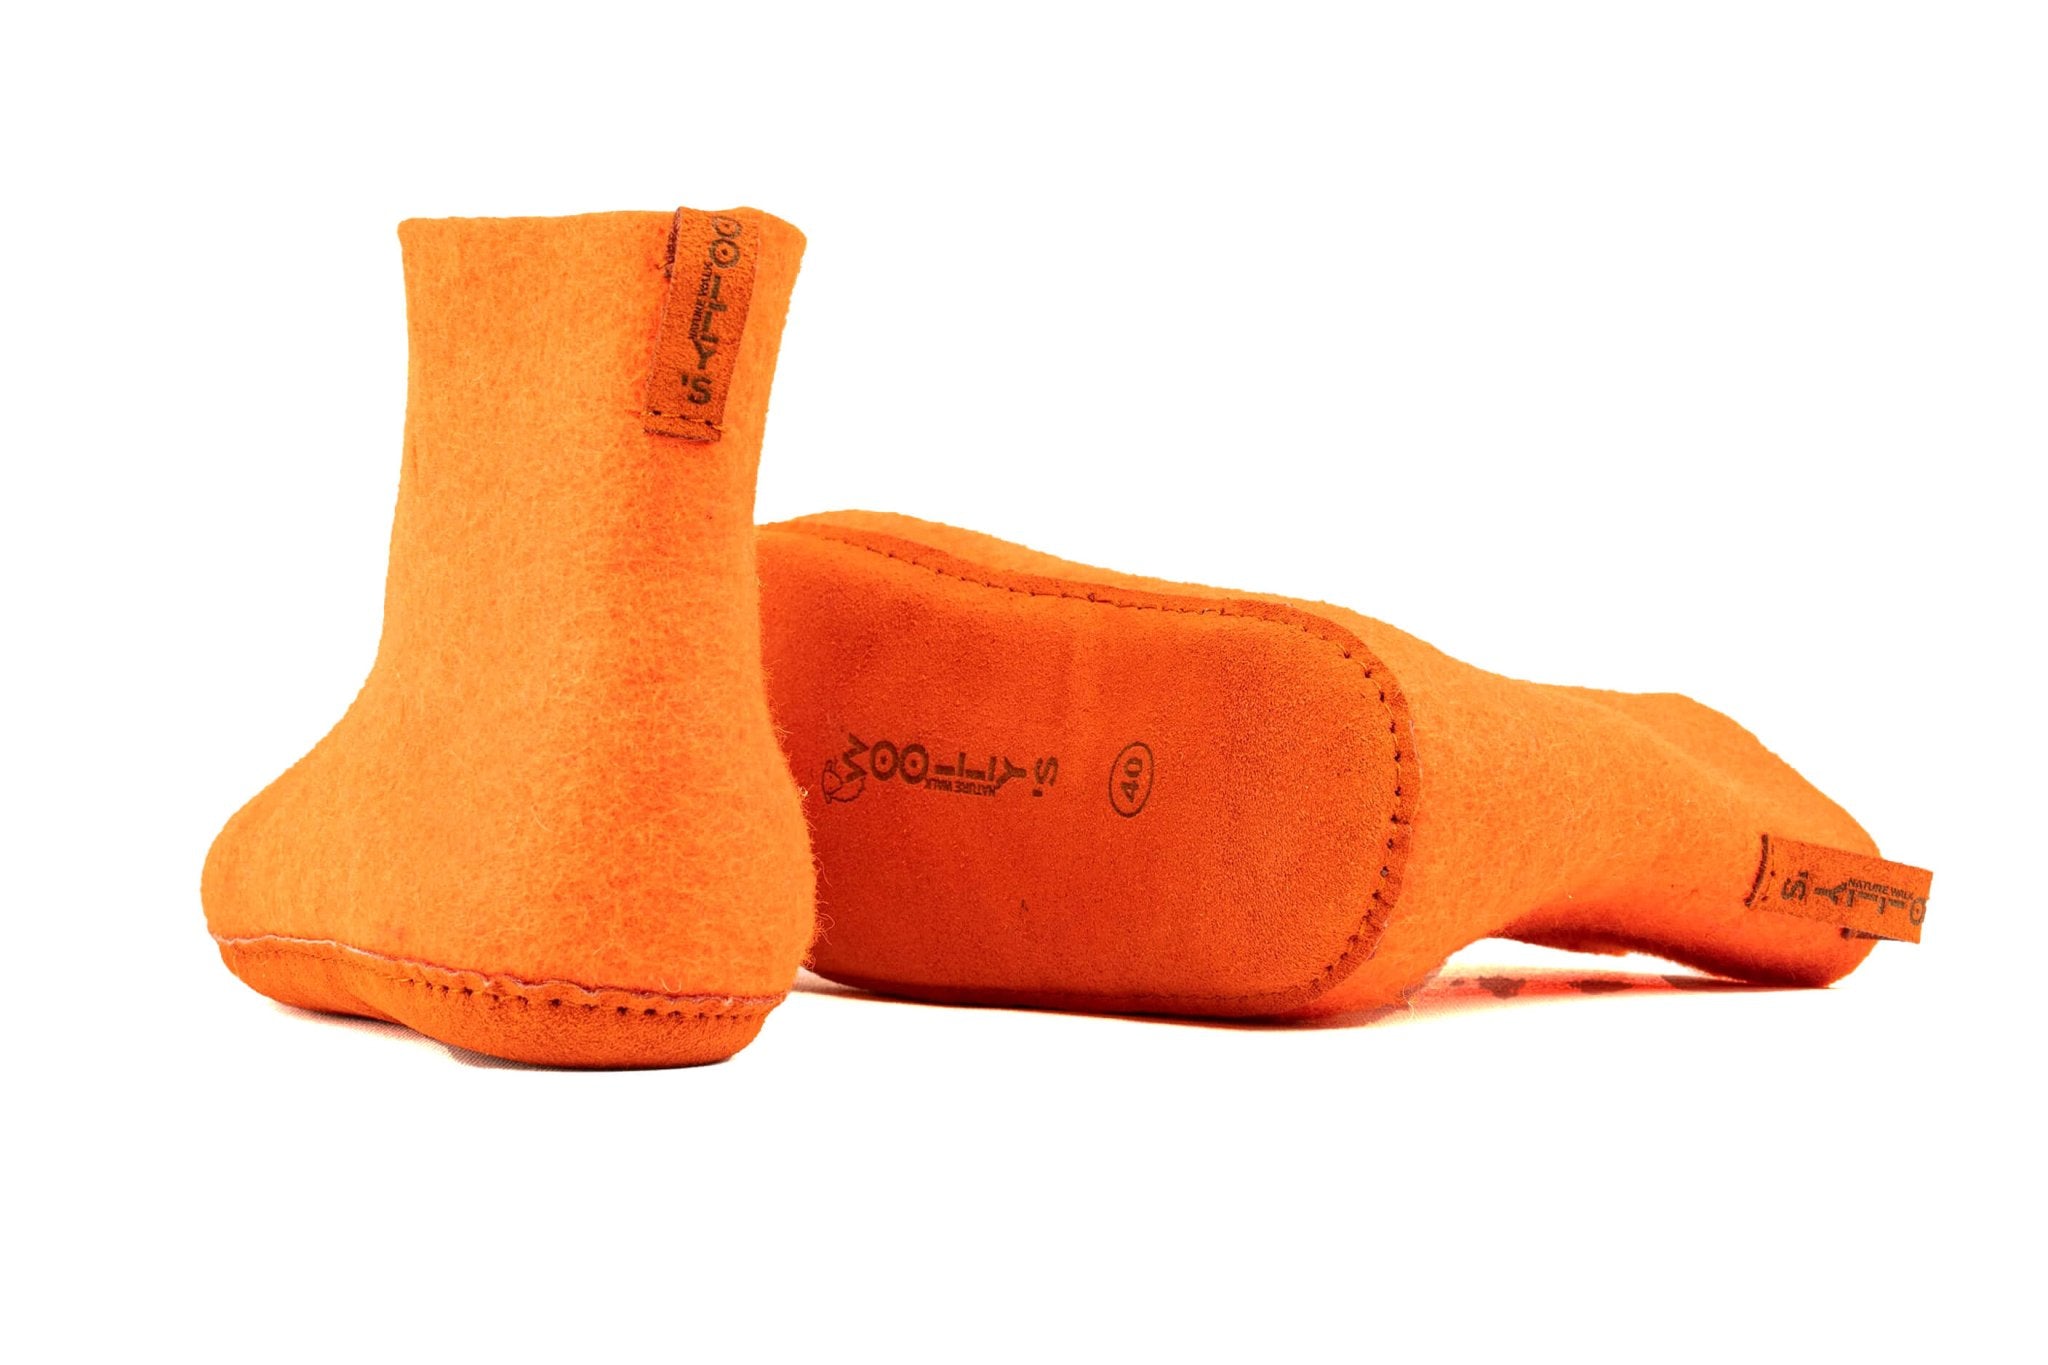 Indoor Boots With Leather Sole - Orange - Woollyes